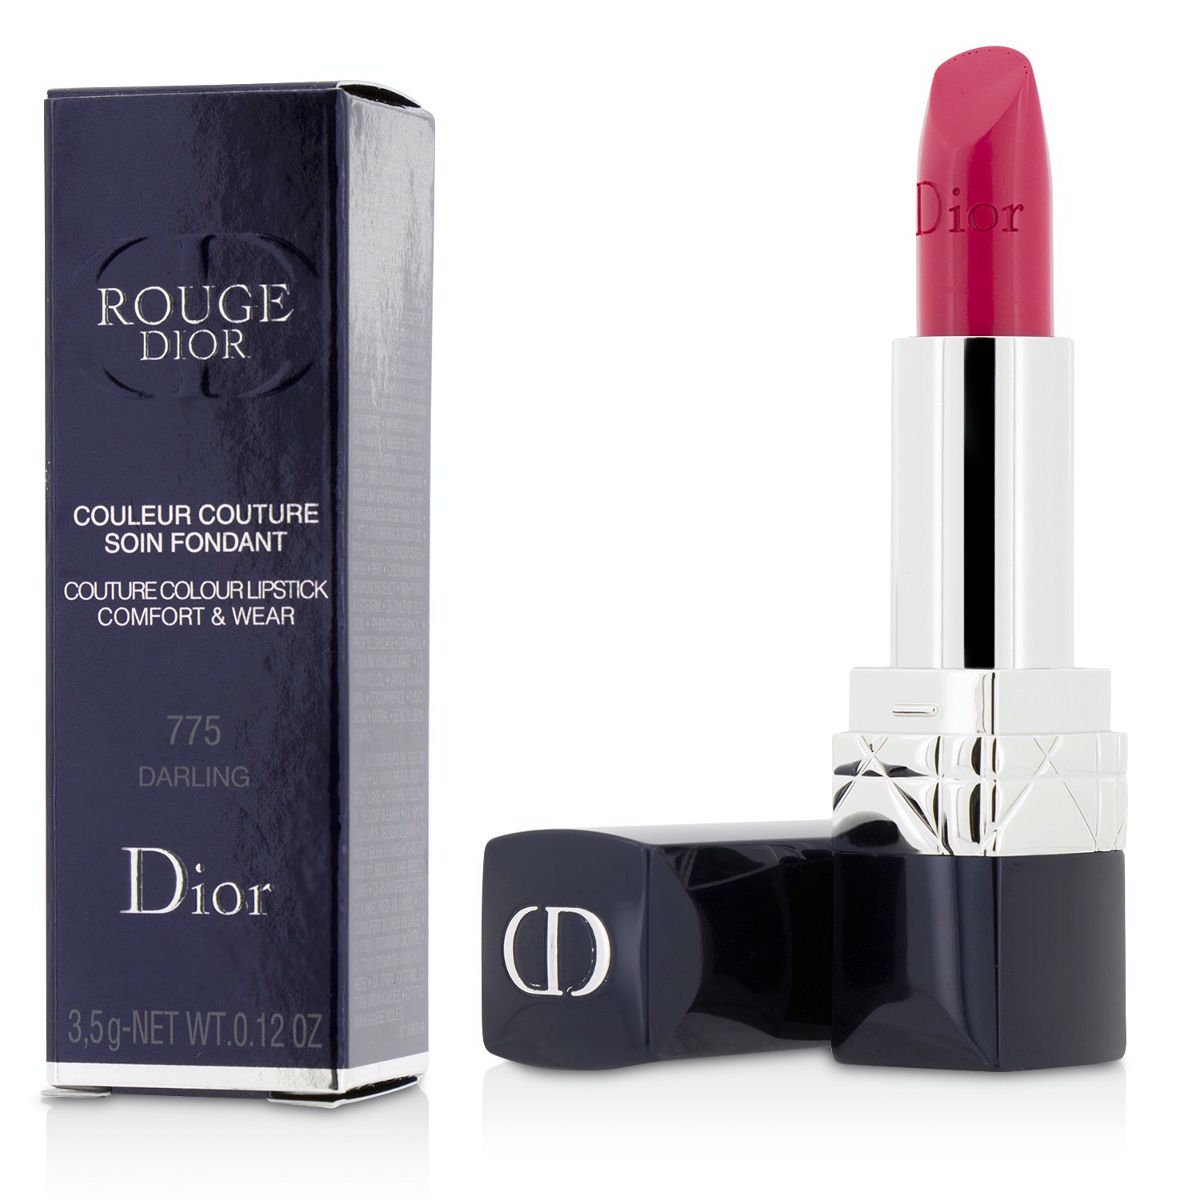 Rouge Dior Couture Colour Comfort  Wear Lipstick - # 775 Darling Christian Dior Image